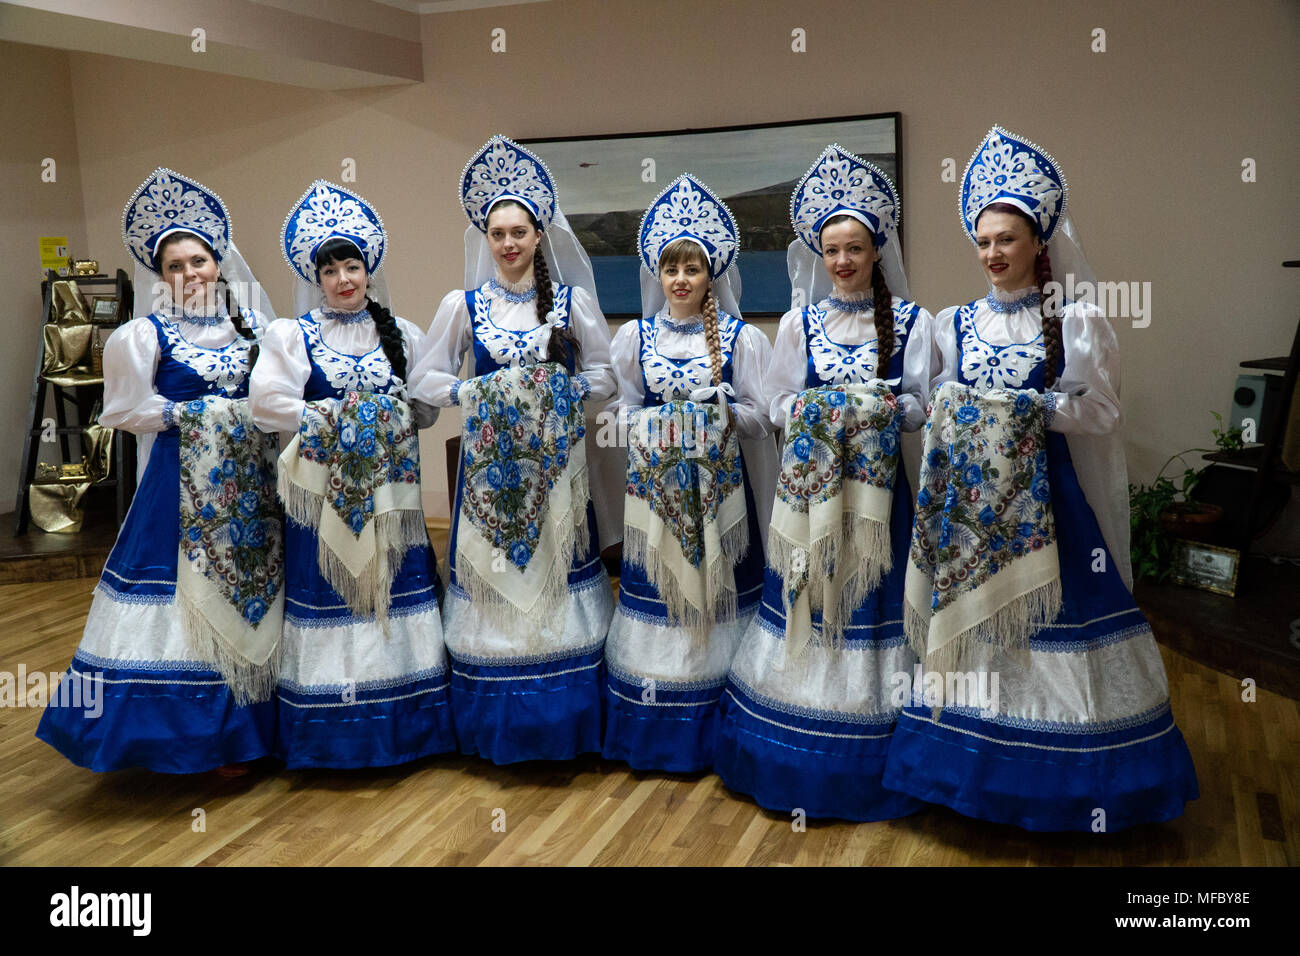 Russian women in traditional costumes in the Russian coal mining settlement of Barentsburg, Spitsbergen Stock Photo